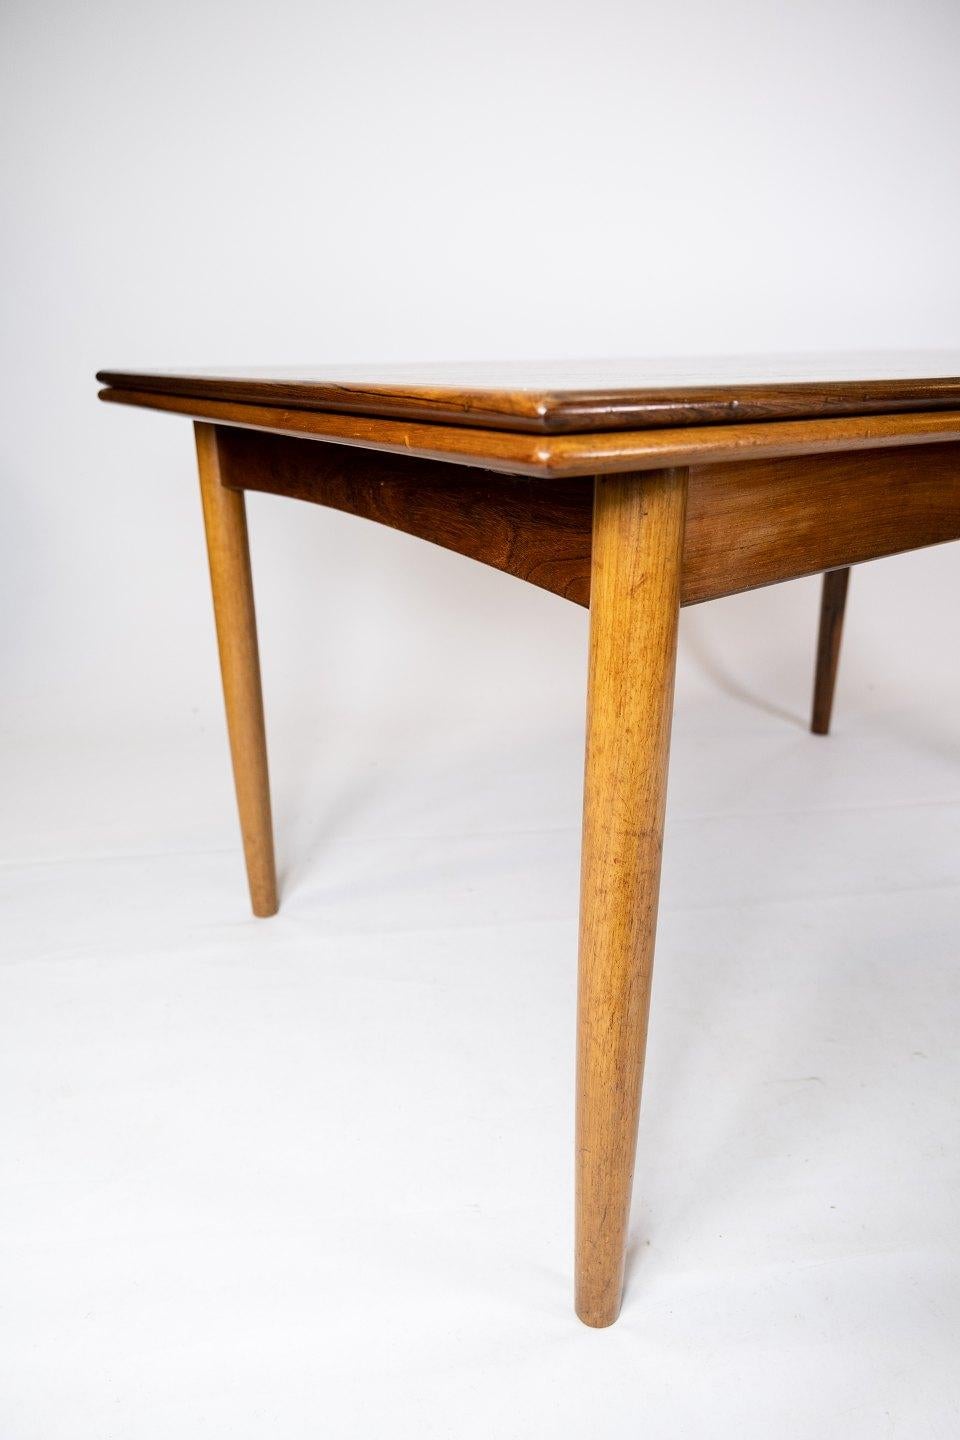 Mid-Century Modern Dining Table Made In Rosewood With Extensions, Danish Design From 1960s For Sale